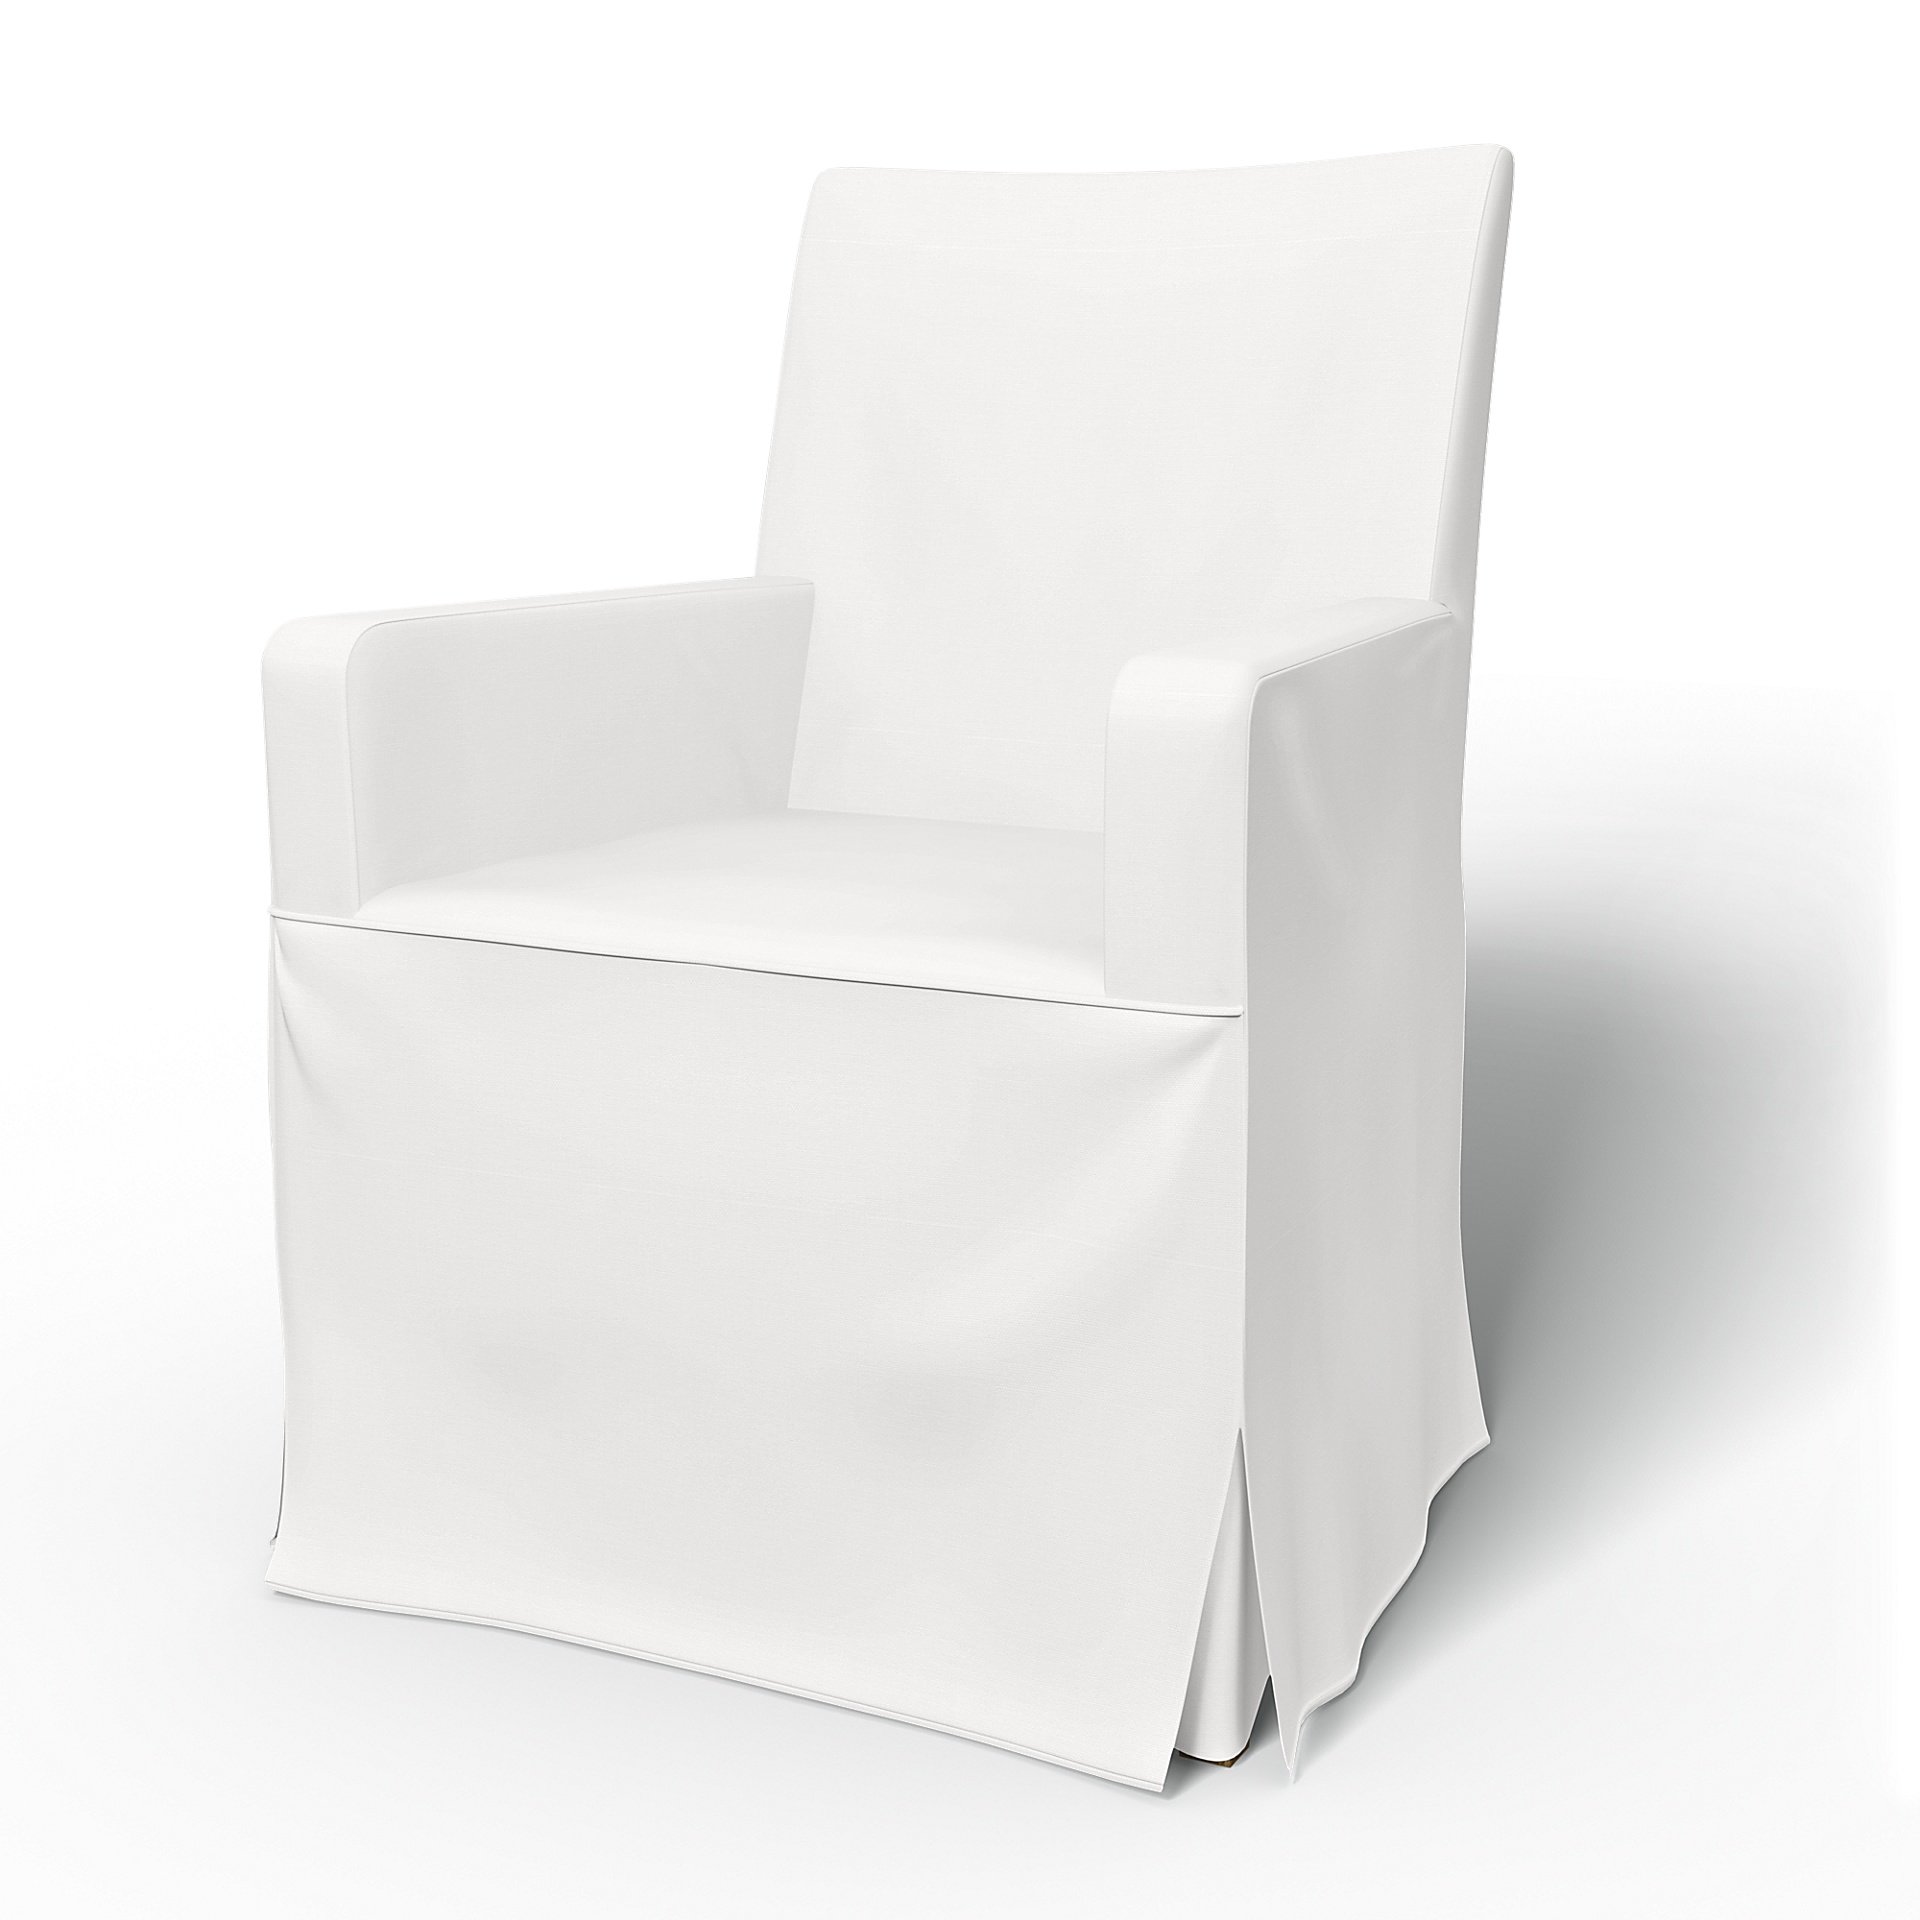 IKEA - Henriksdal, Chair cover w/ armrests, long skirt box pleat, Absolute White, Cotton - Bemz